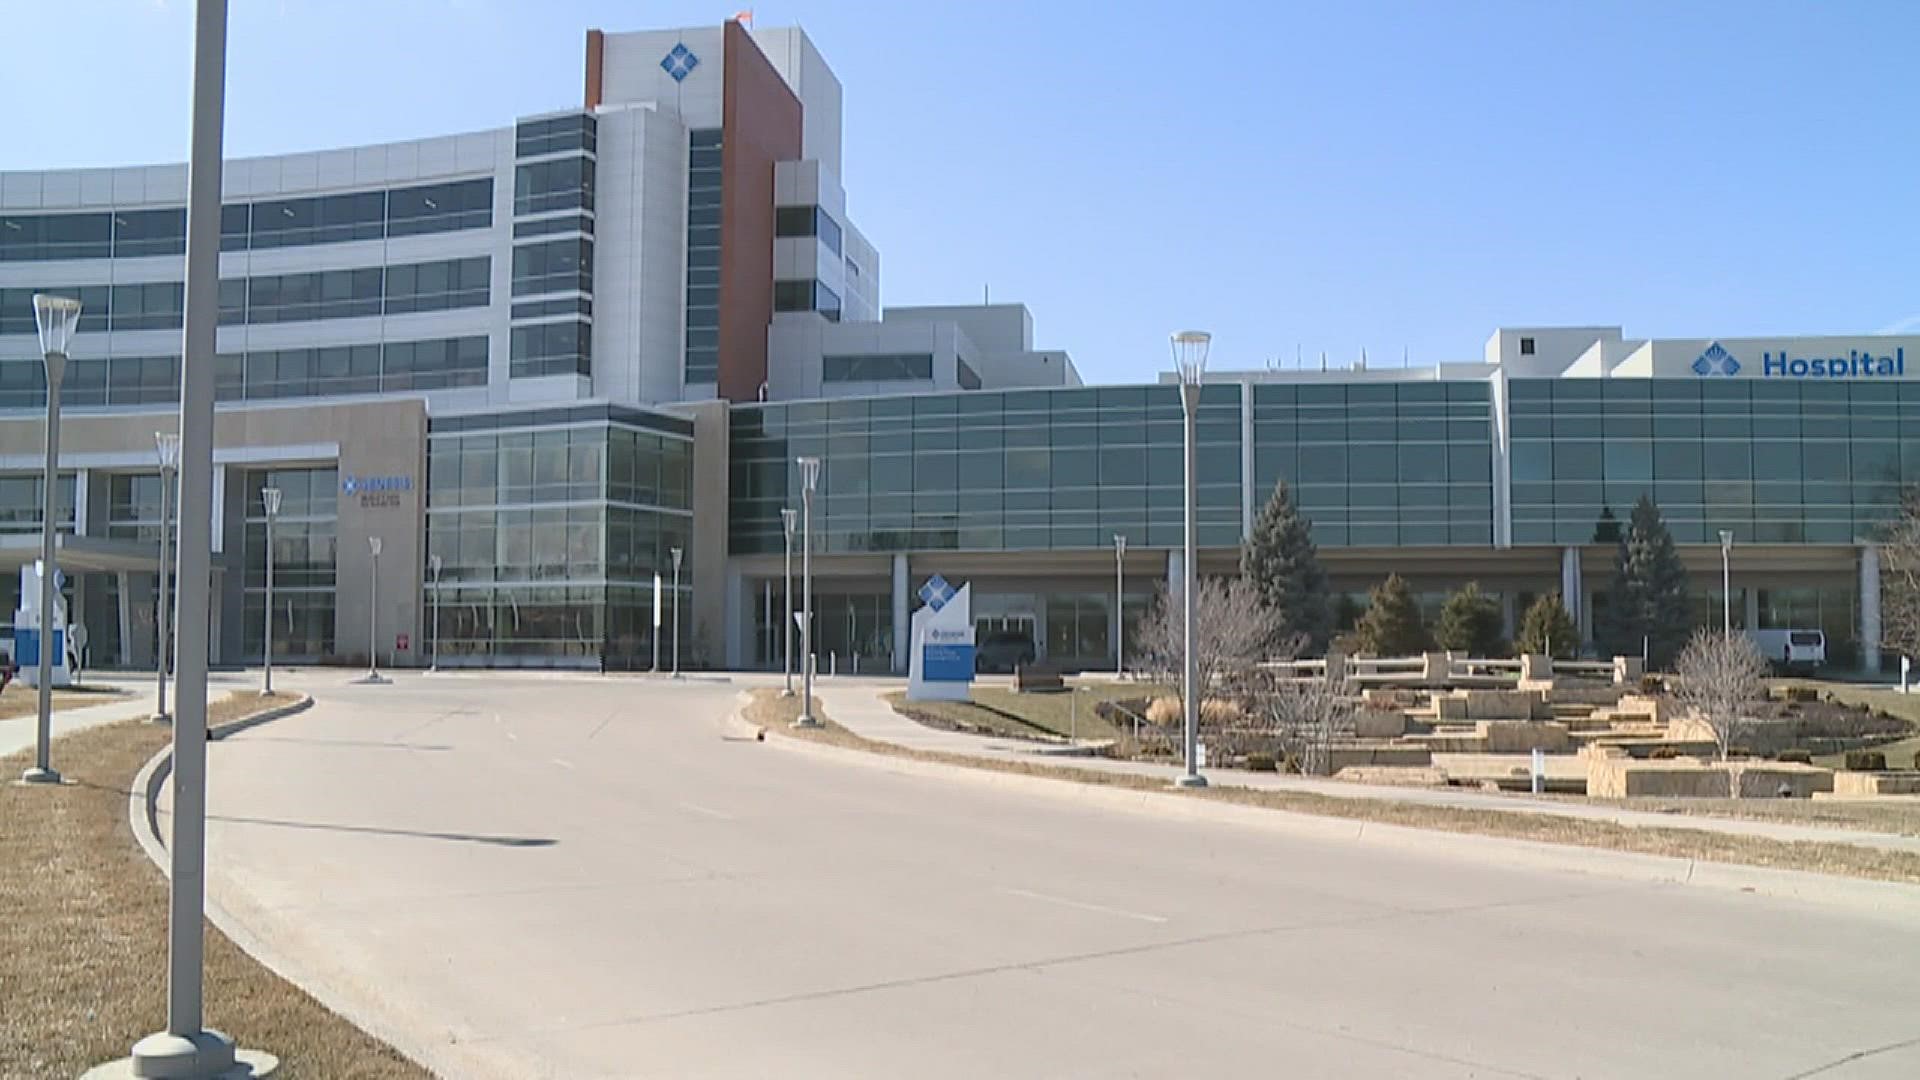 Area health leaders say hospitals are seeing the largest number of COVID patients since the pandemic began.